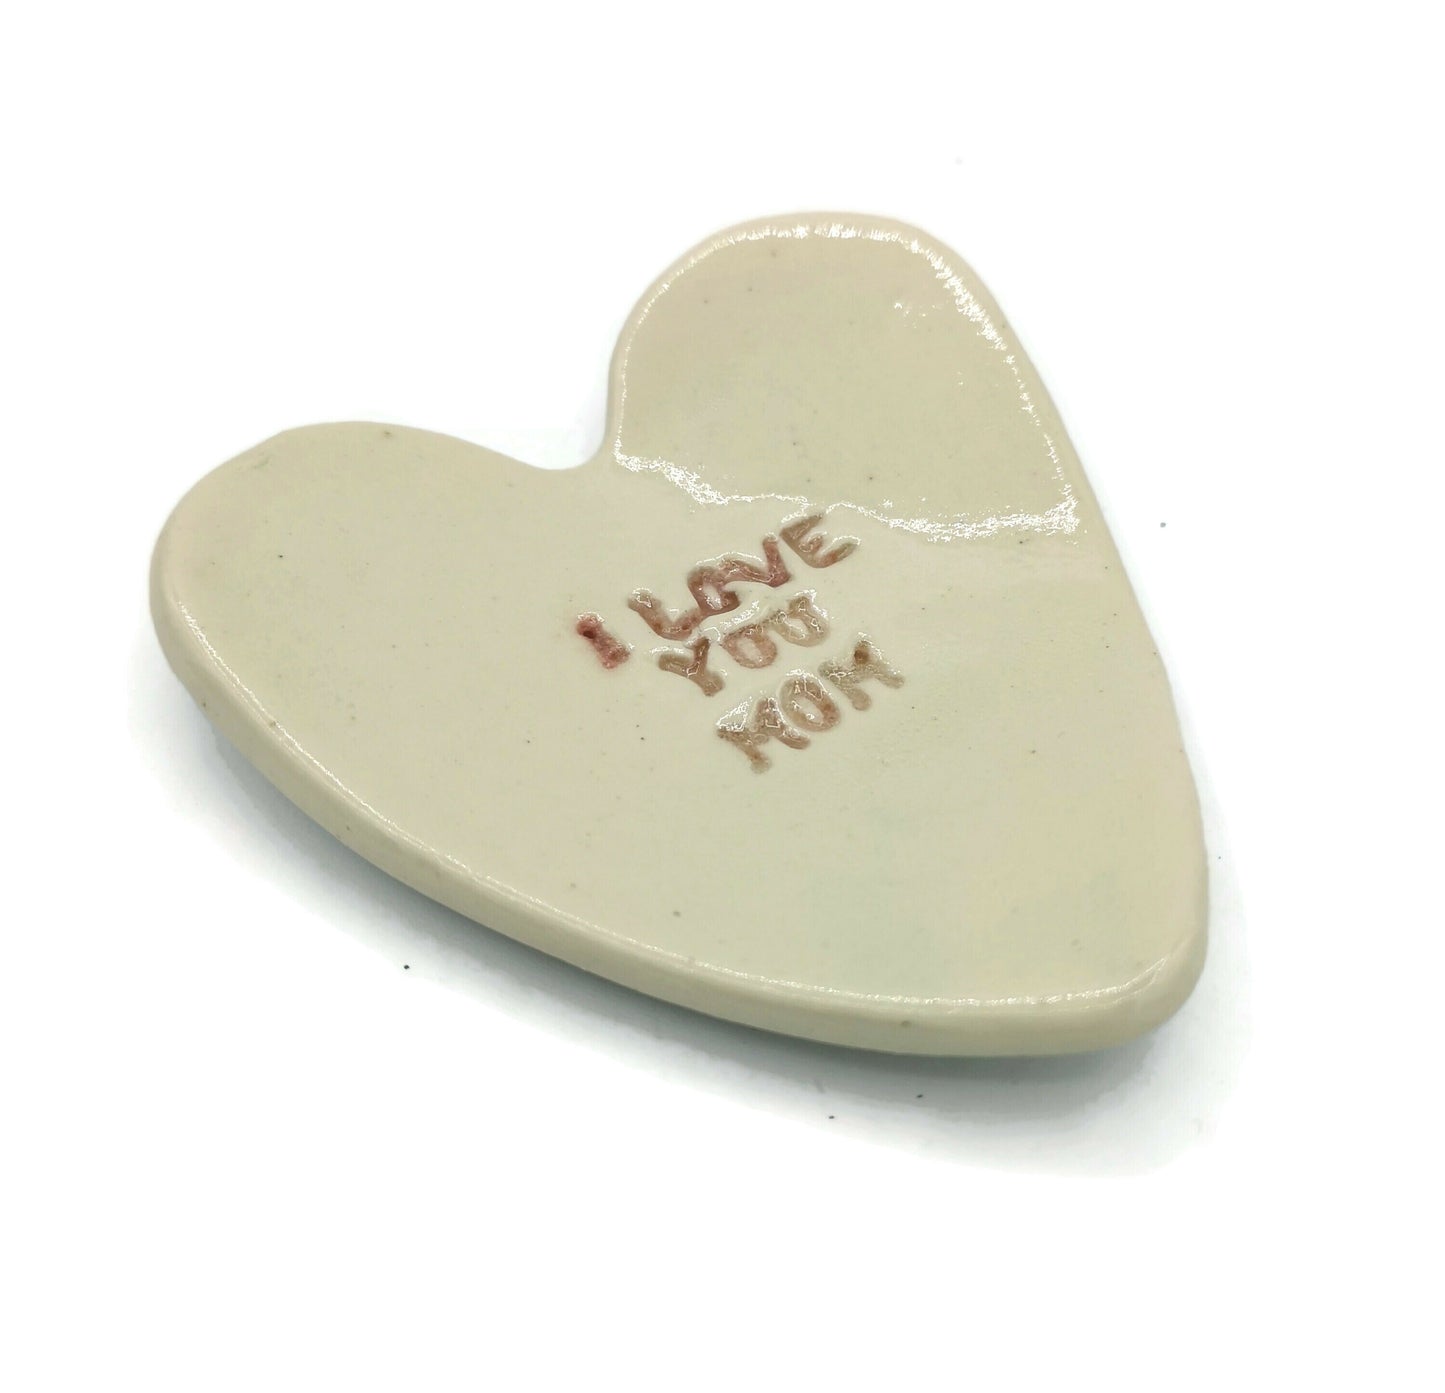 Ceramic Ring Dish Heart Shaped, Mothers Day Gift From Son, Mother in Law Gift, Best Sellers I Love You Mom Birthday Gift, Relish Didh - Ceramica Ana Rafael